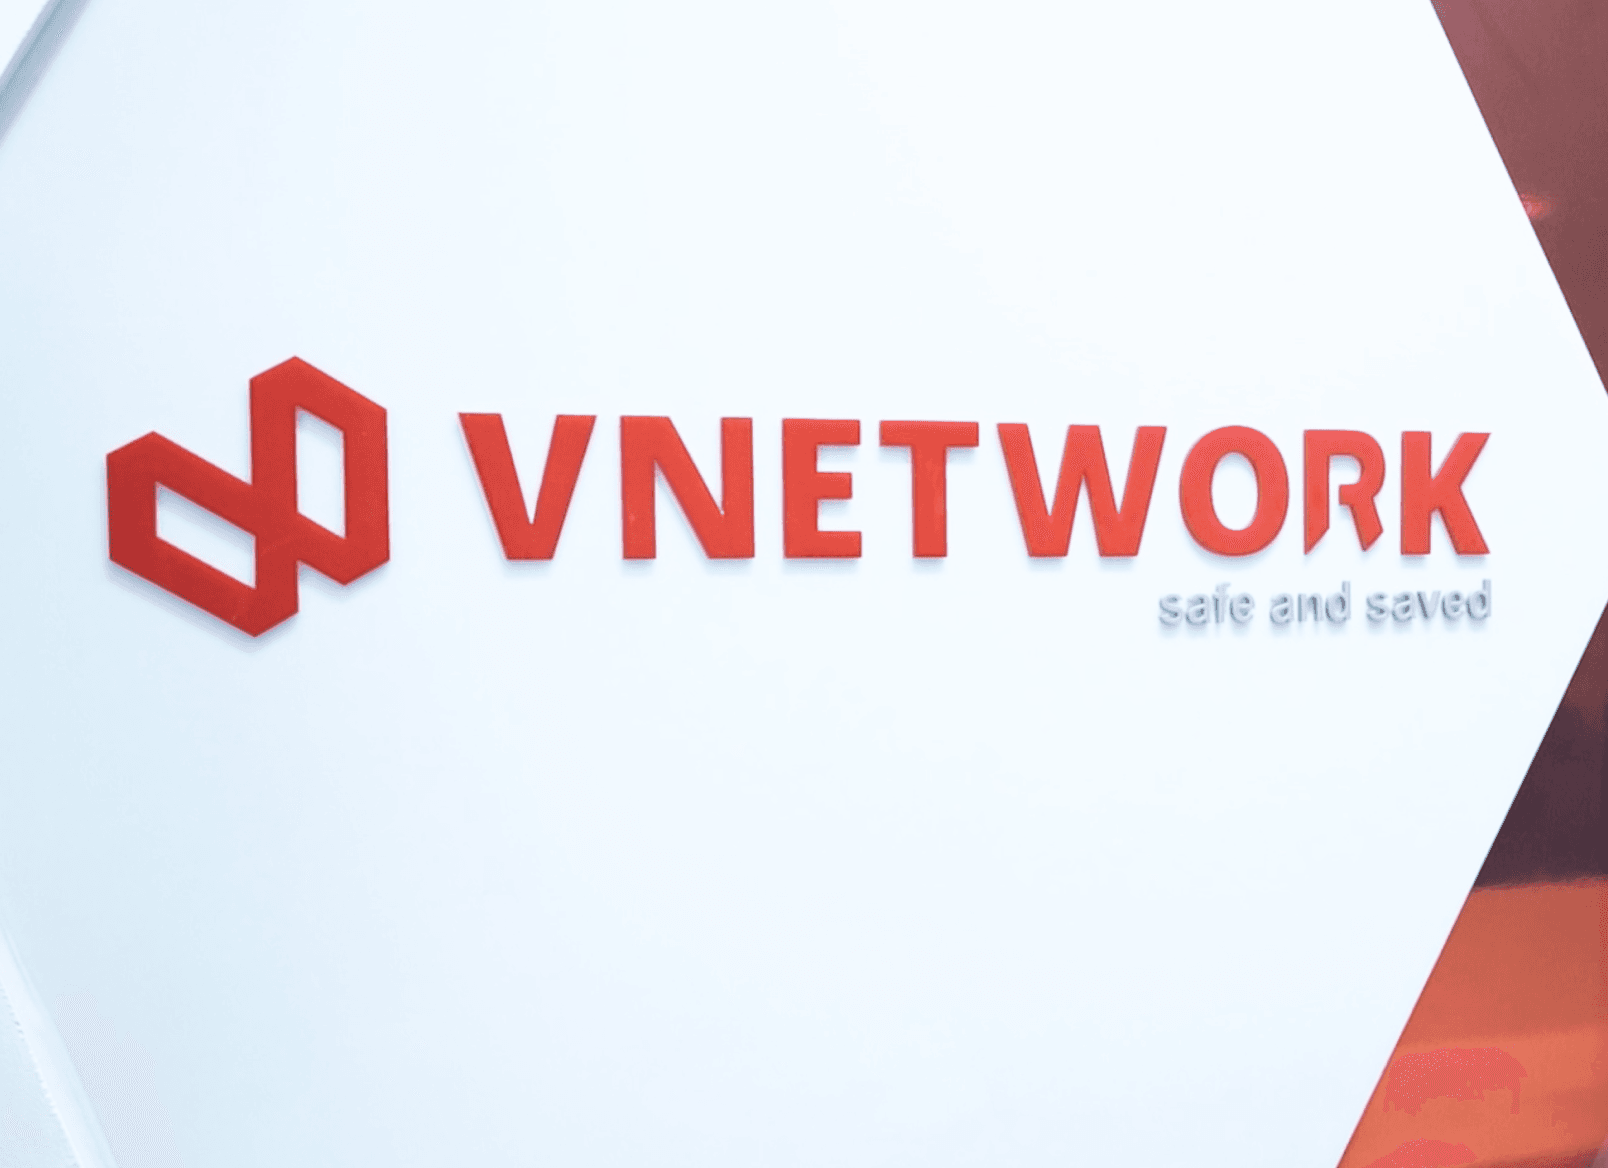 About VNETWORK